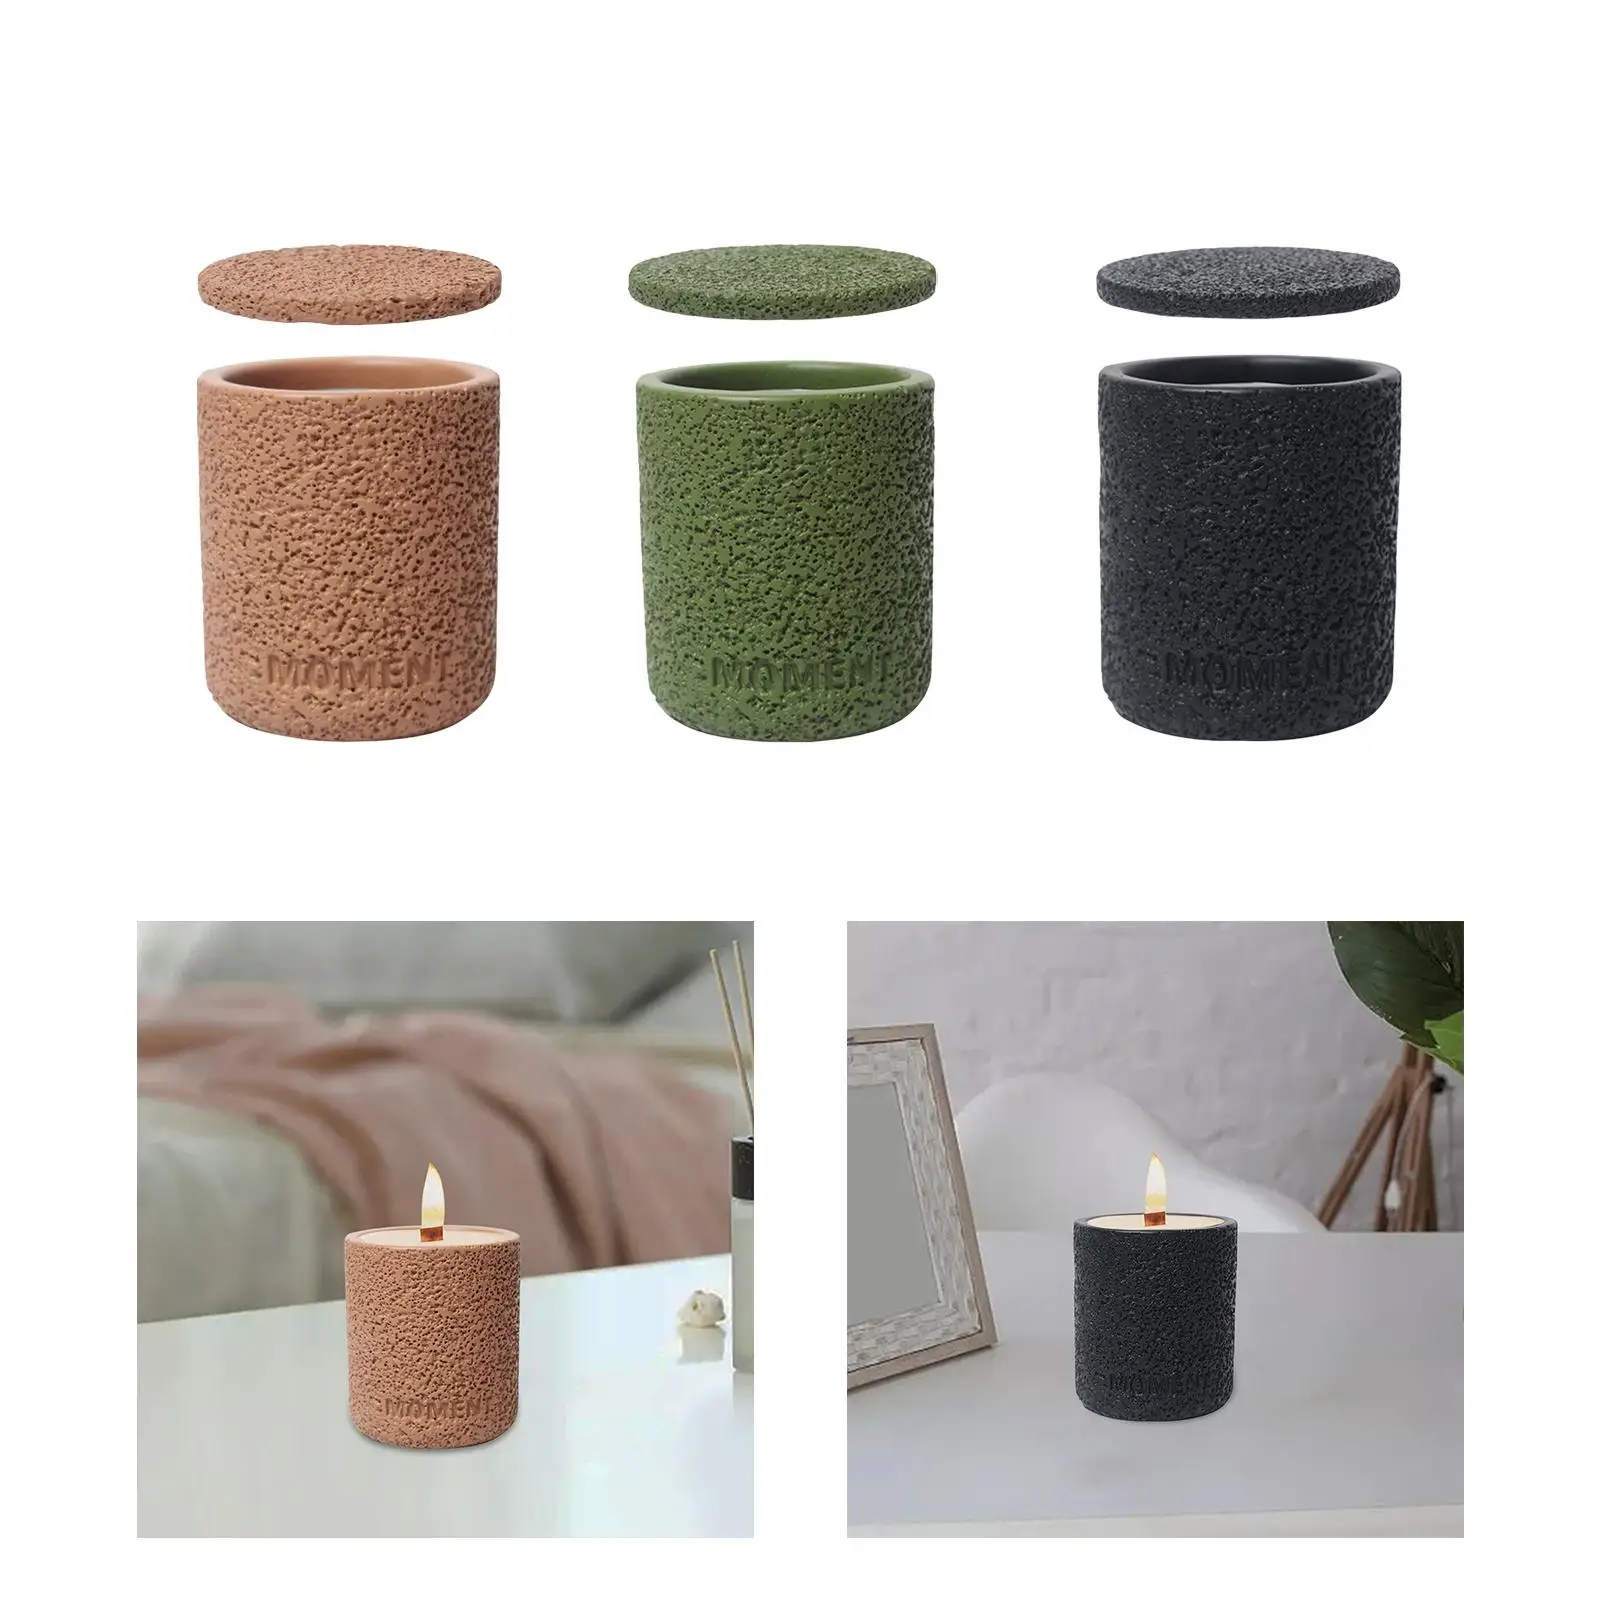 Candle Holders for Tea Lights Candle DIY Candles Soybean Container Decorative Small Tealight Cups Holder Votive Candle Holders images - 6